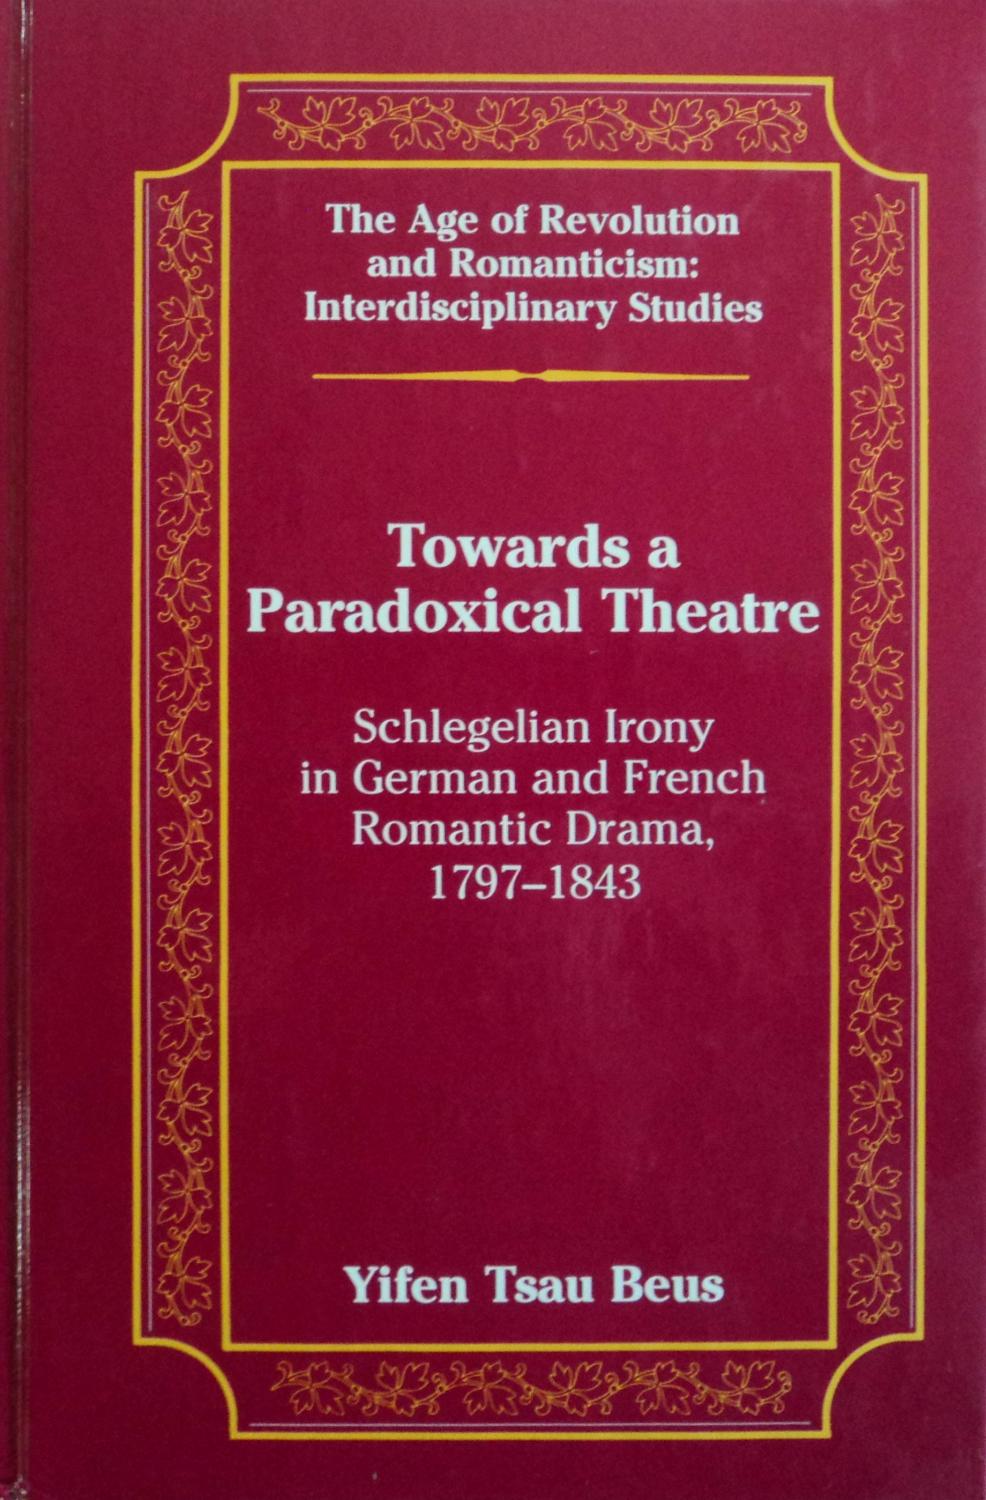 Towards a Paradoxical Theatre: Schlegelian Irony in German and French Romantic Drama, 1797-1843 (The Age of Revolution and Romanticism, 32) - Yifen Tsau Beus